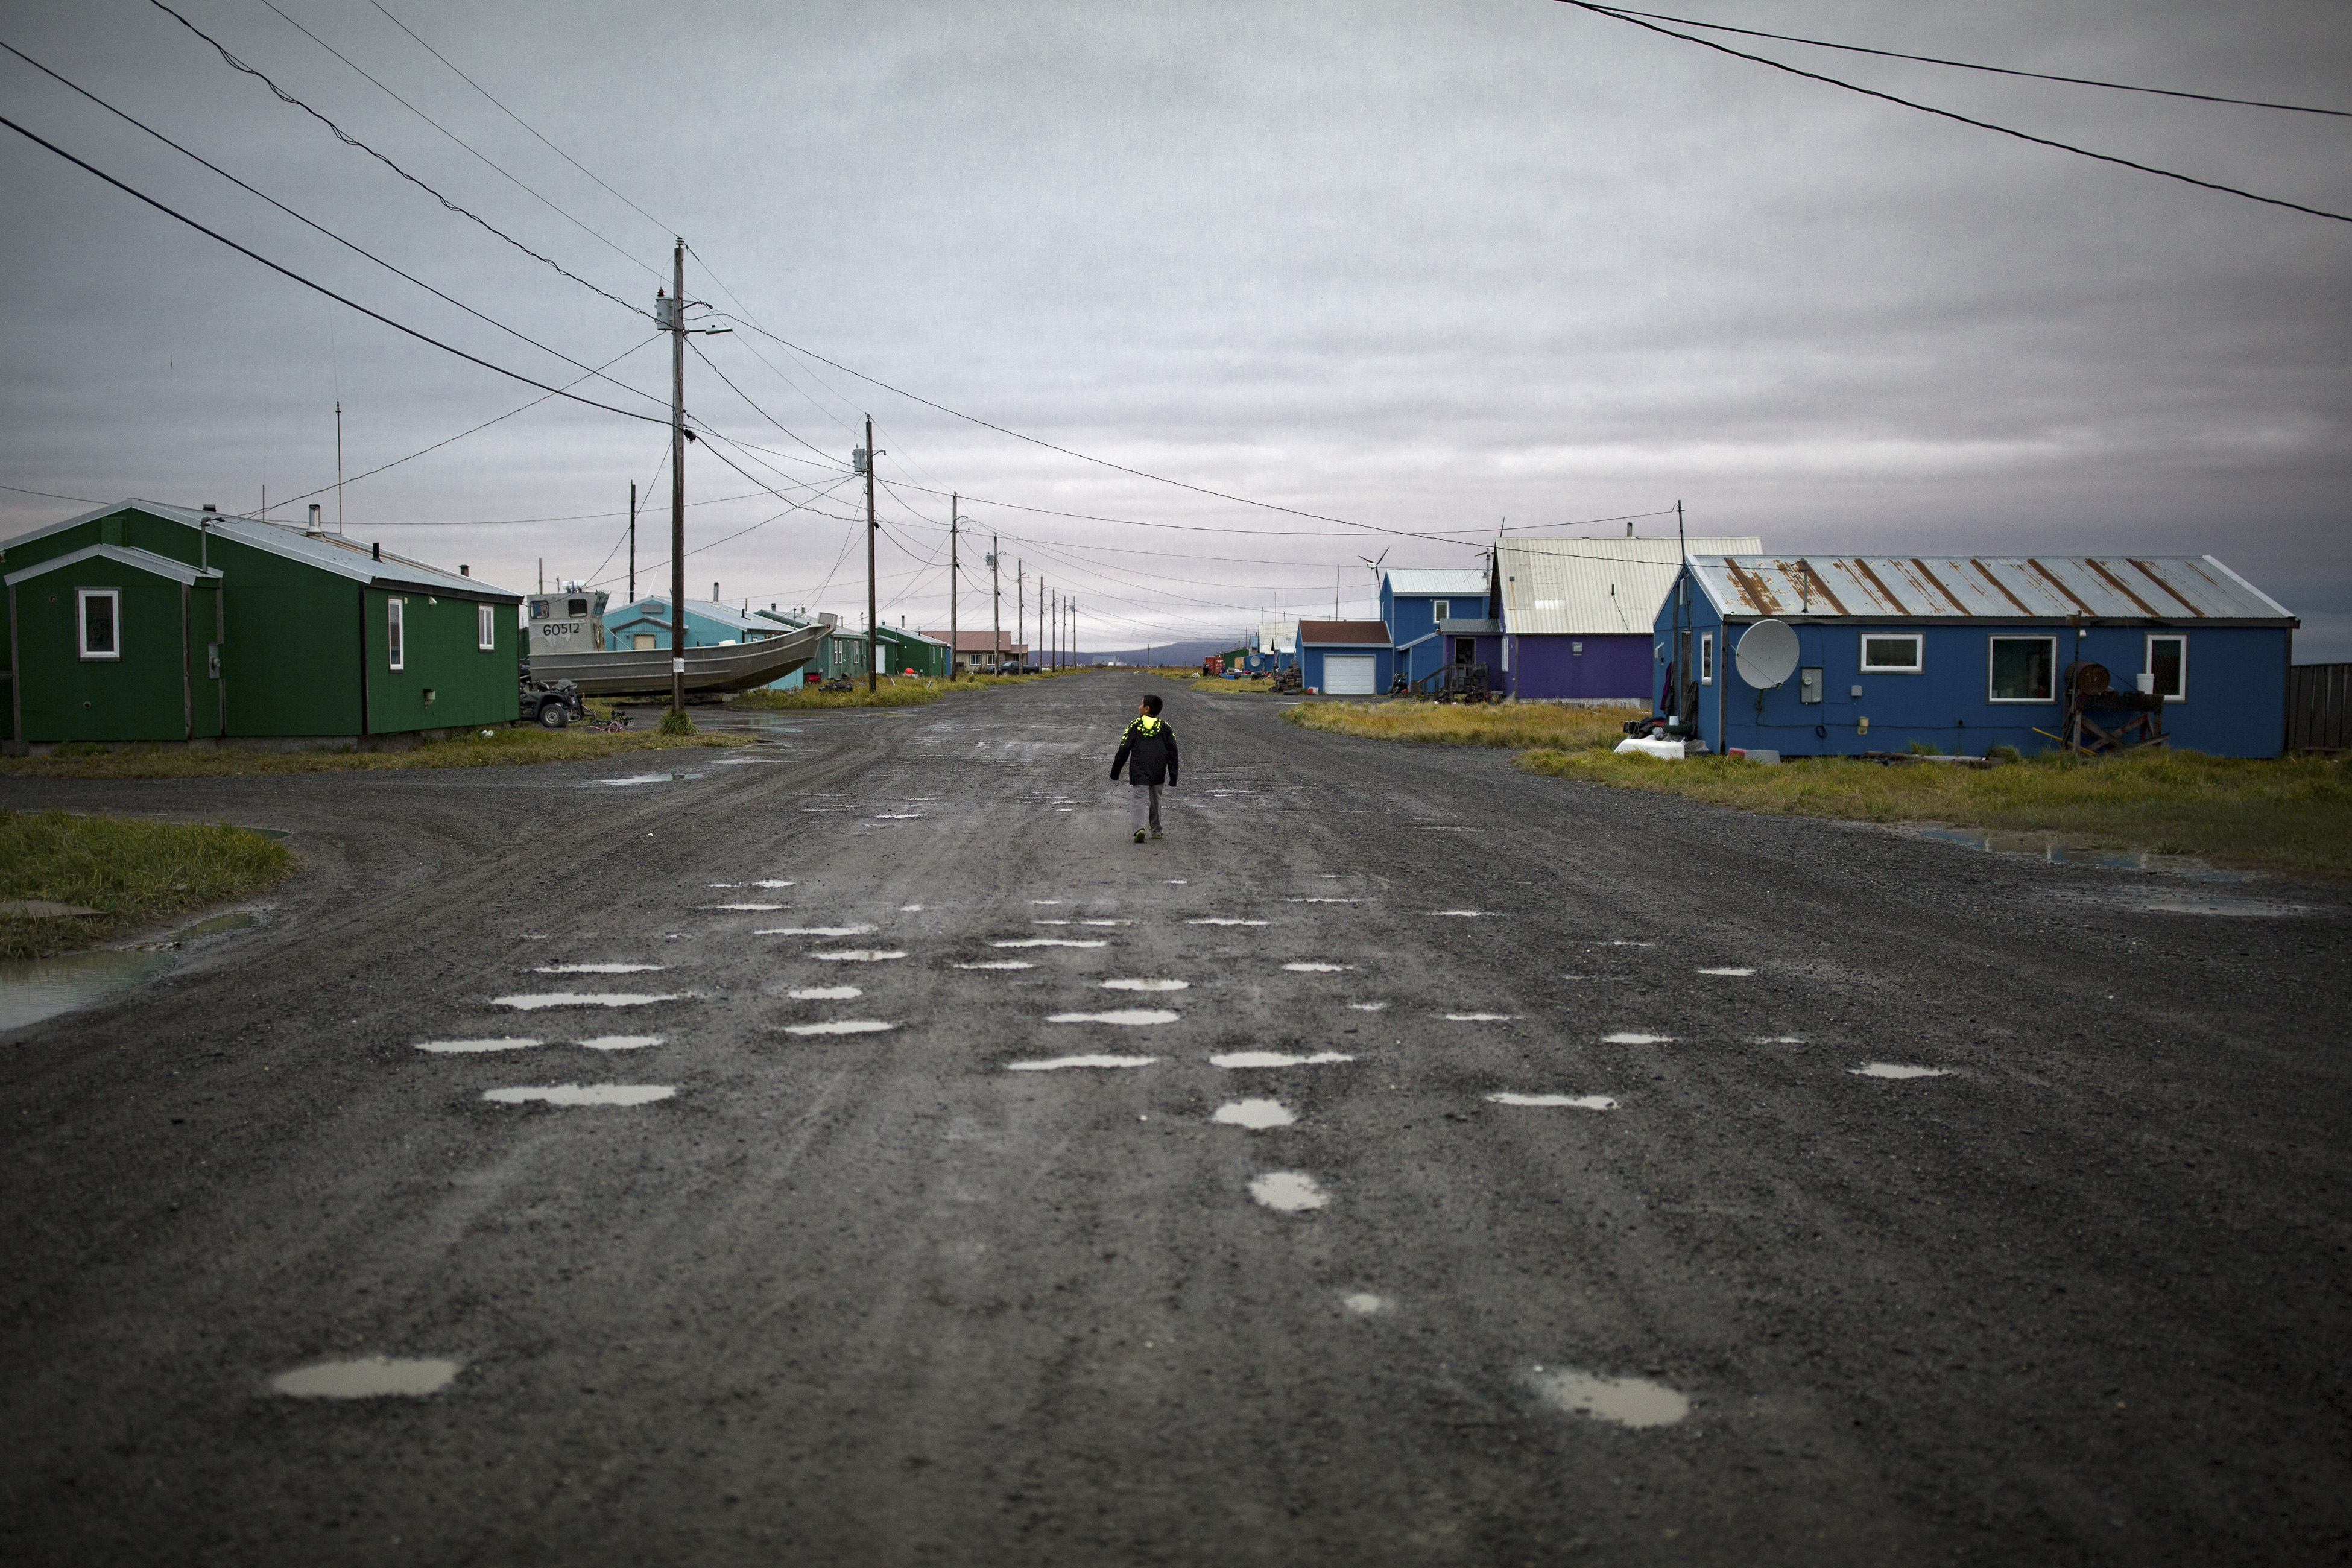 A road full of potholes and puddles in the Alaskan village of Shaktoolik, Sept. 15, 2016. The government has identified at least 31 Alaskan towns and cities at imminent risk of destruction from flooding and erosion due to the changing climate, with Shaktoolik ranking among the top four. (Josh Haner/The New York Times)